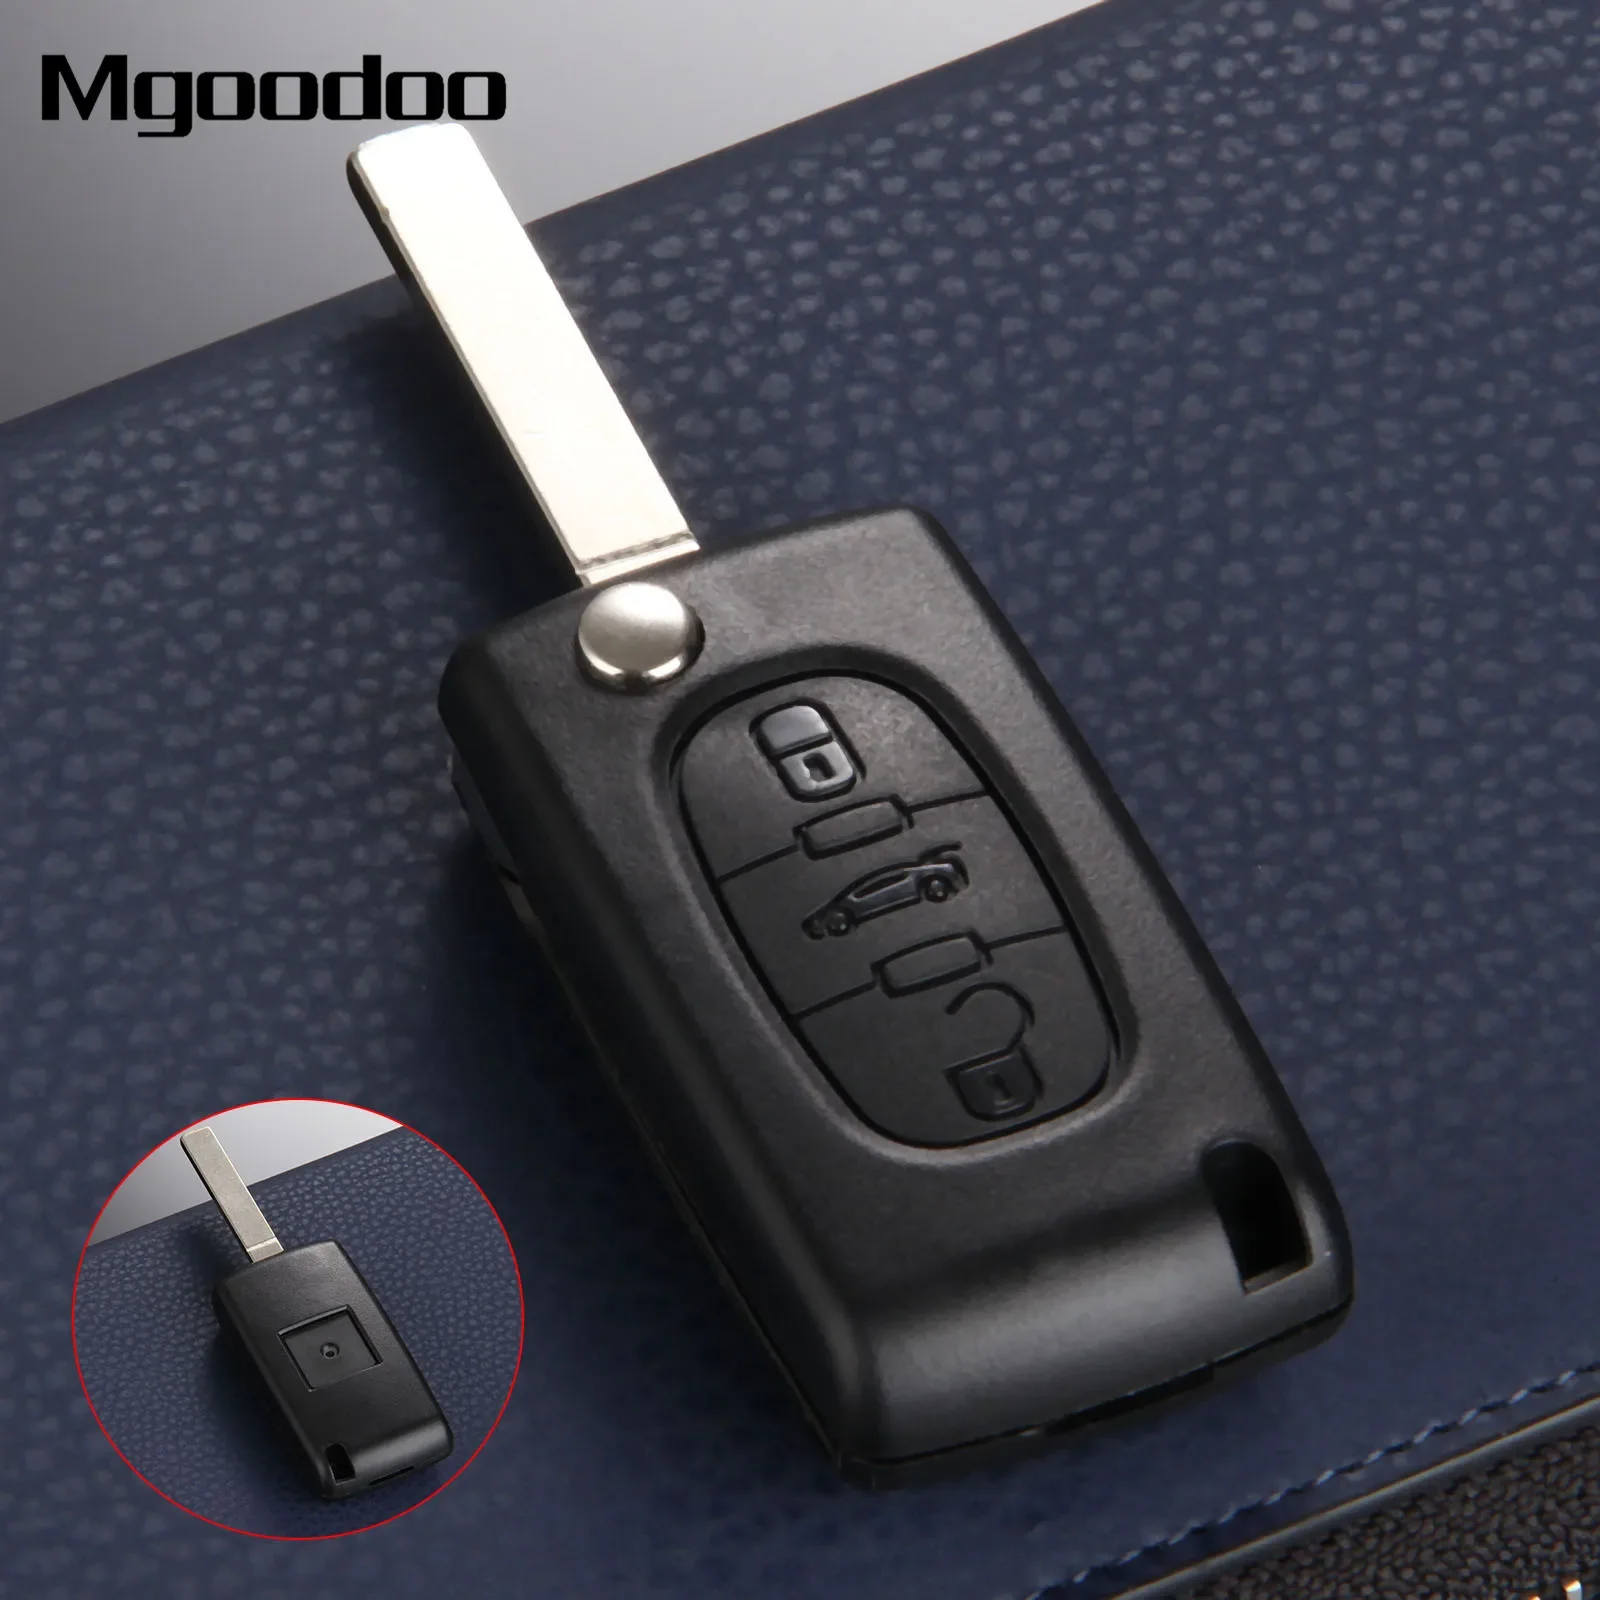 Mgoodoo 3 Buttons Flip Folding Remote Entry Key Shell Case For 207 307 308 407 607 Replacement Car Key Fob Cover ​3 4 buttons car key shell fob remote control case keyless entry for ford escape exursion explorer mercury key replacement cover